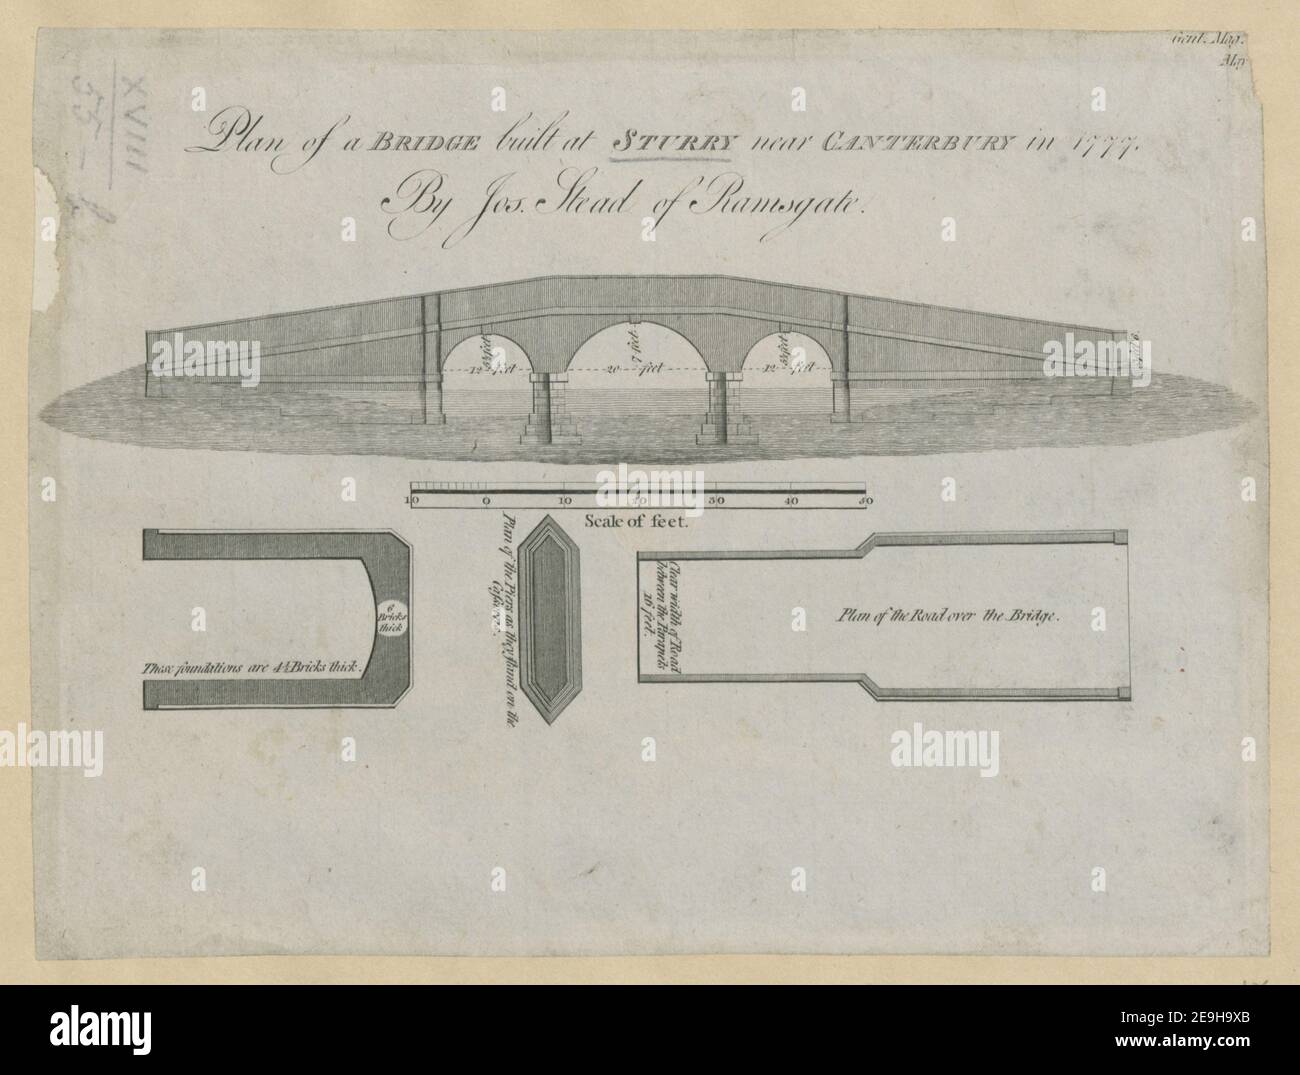 Plan of a Bridge built at Sturry near Canterbury in 1777.  Visual Material information:  Title: Plan of a Bridge built at Sturry near Canterbury in 1777.  18.55.b. Place of publication: [Ramsgate?] Publisher: [unknown publisher] Date of publication: [1777 c.]  Item type: 1 print Medium: etching Dimensions: sheet 17.5 x 23.1 cm [trimmed within platemark]  Former owner: George III, King of Great Britain, 1738-1820 Stock Photo